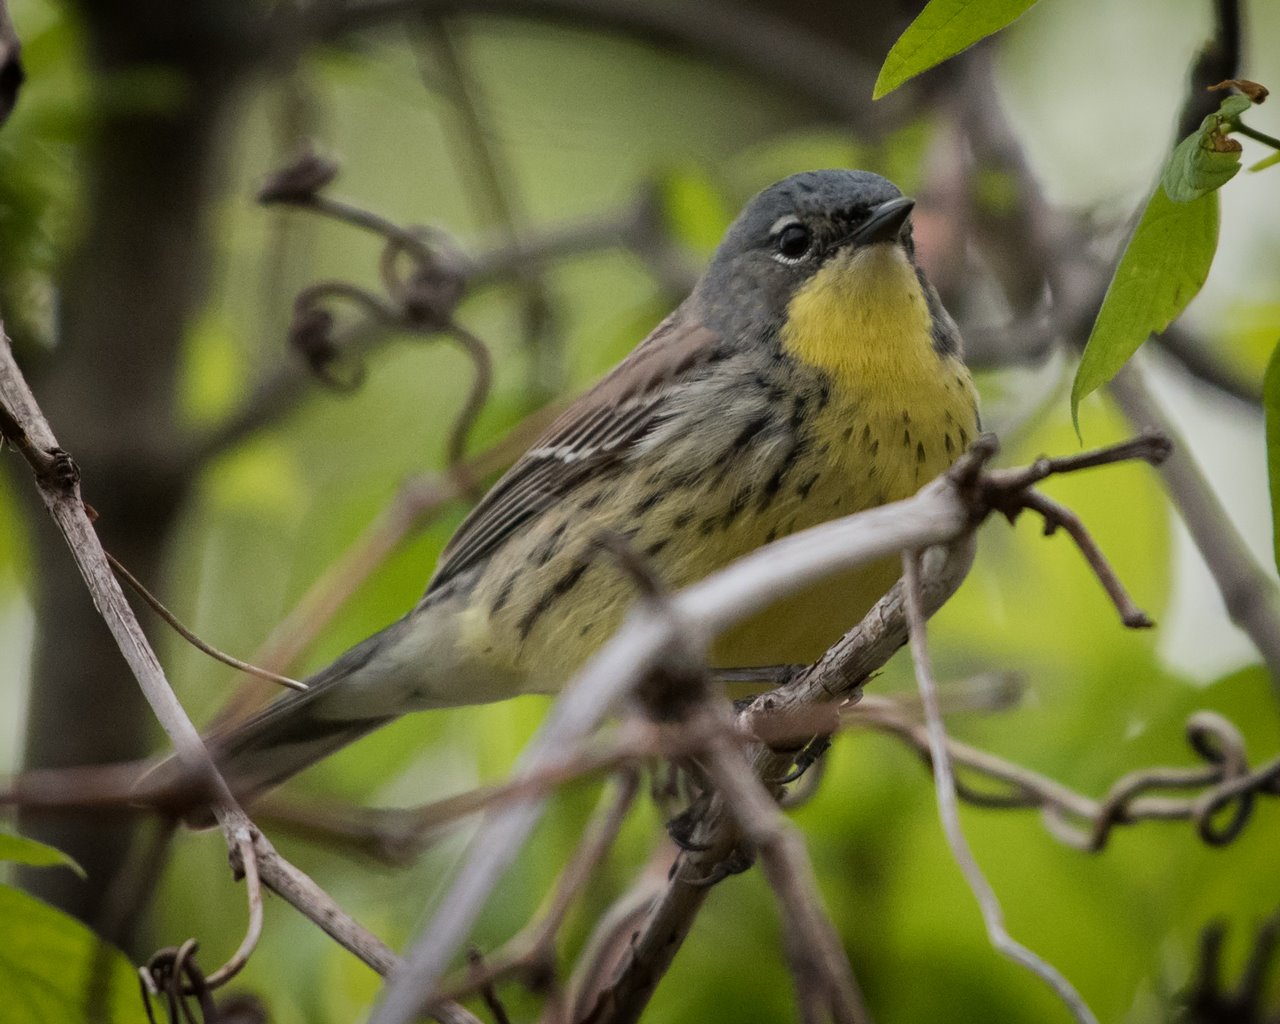 Kirtland’s warbler- the bird that started my quest